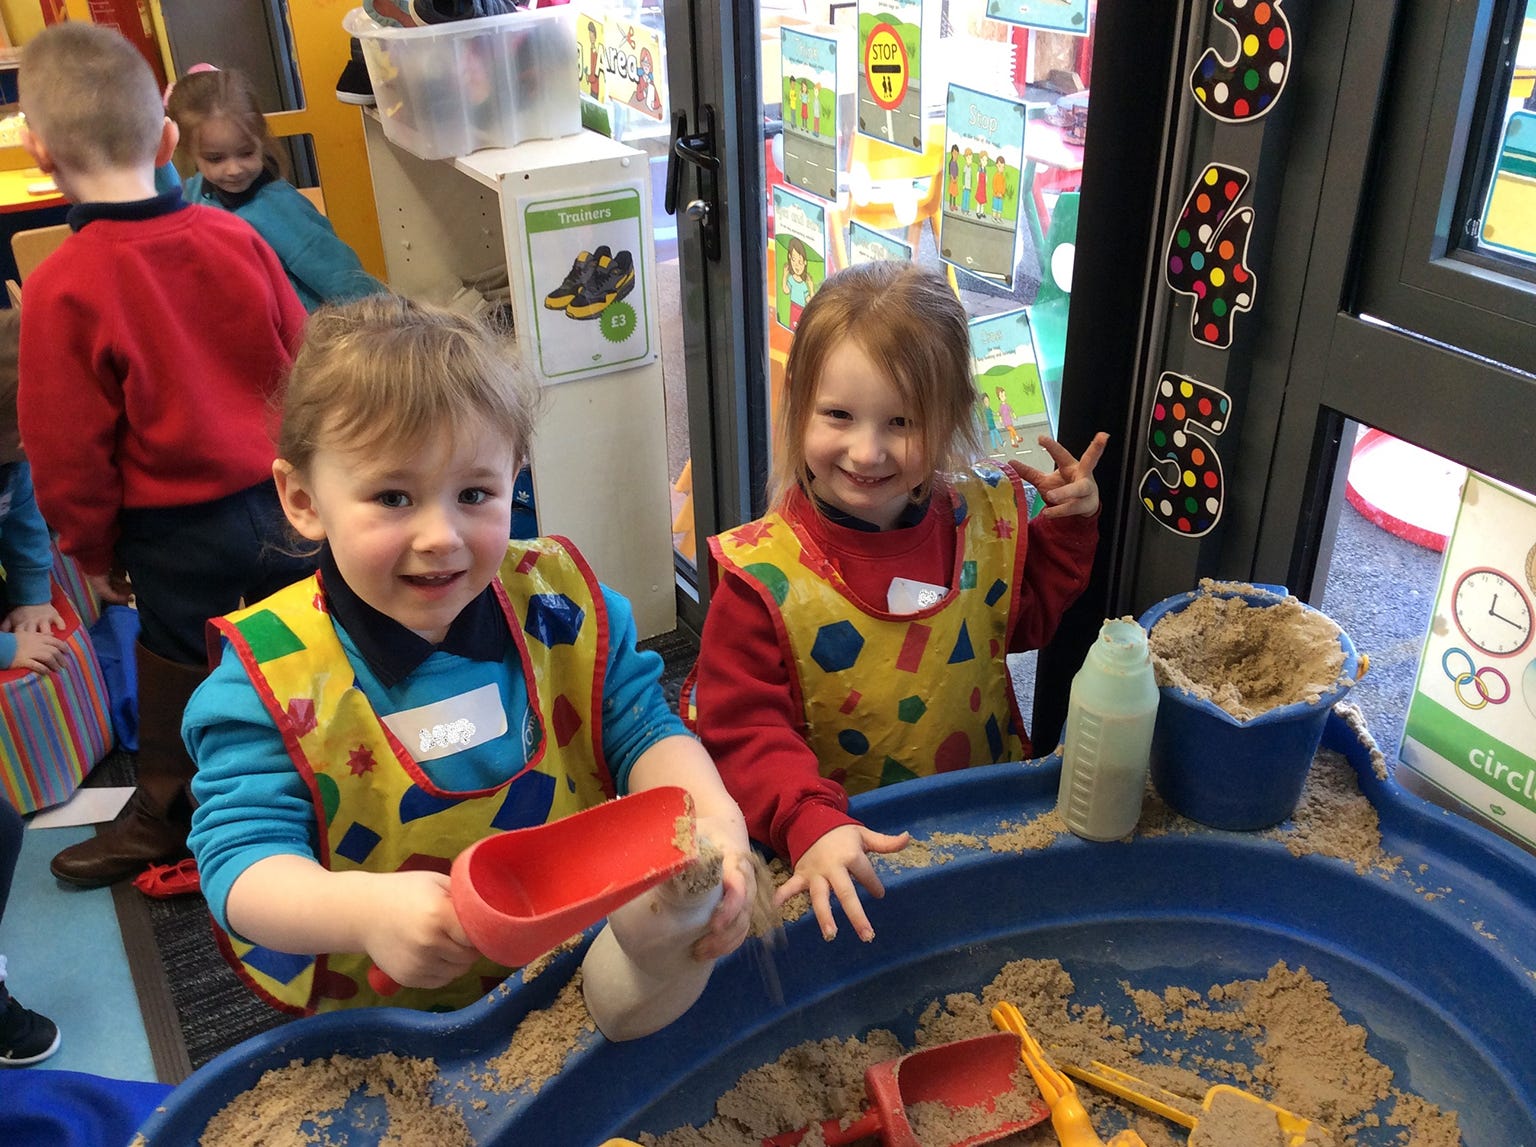 Omagh Integrated Nursery, Omagh North Nursery, and Christ the King Nursery — a variety of play and craft activities that supported the children’s development as well as promoting the development of friendships. ©2020 Early Years.